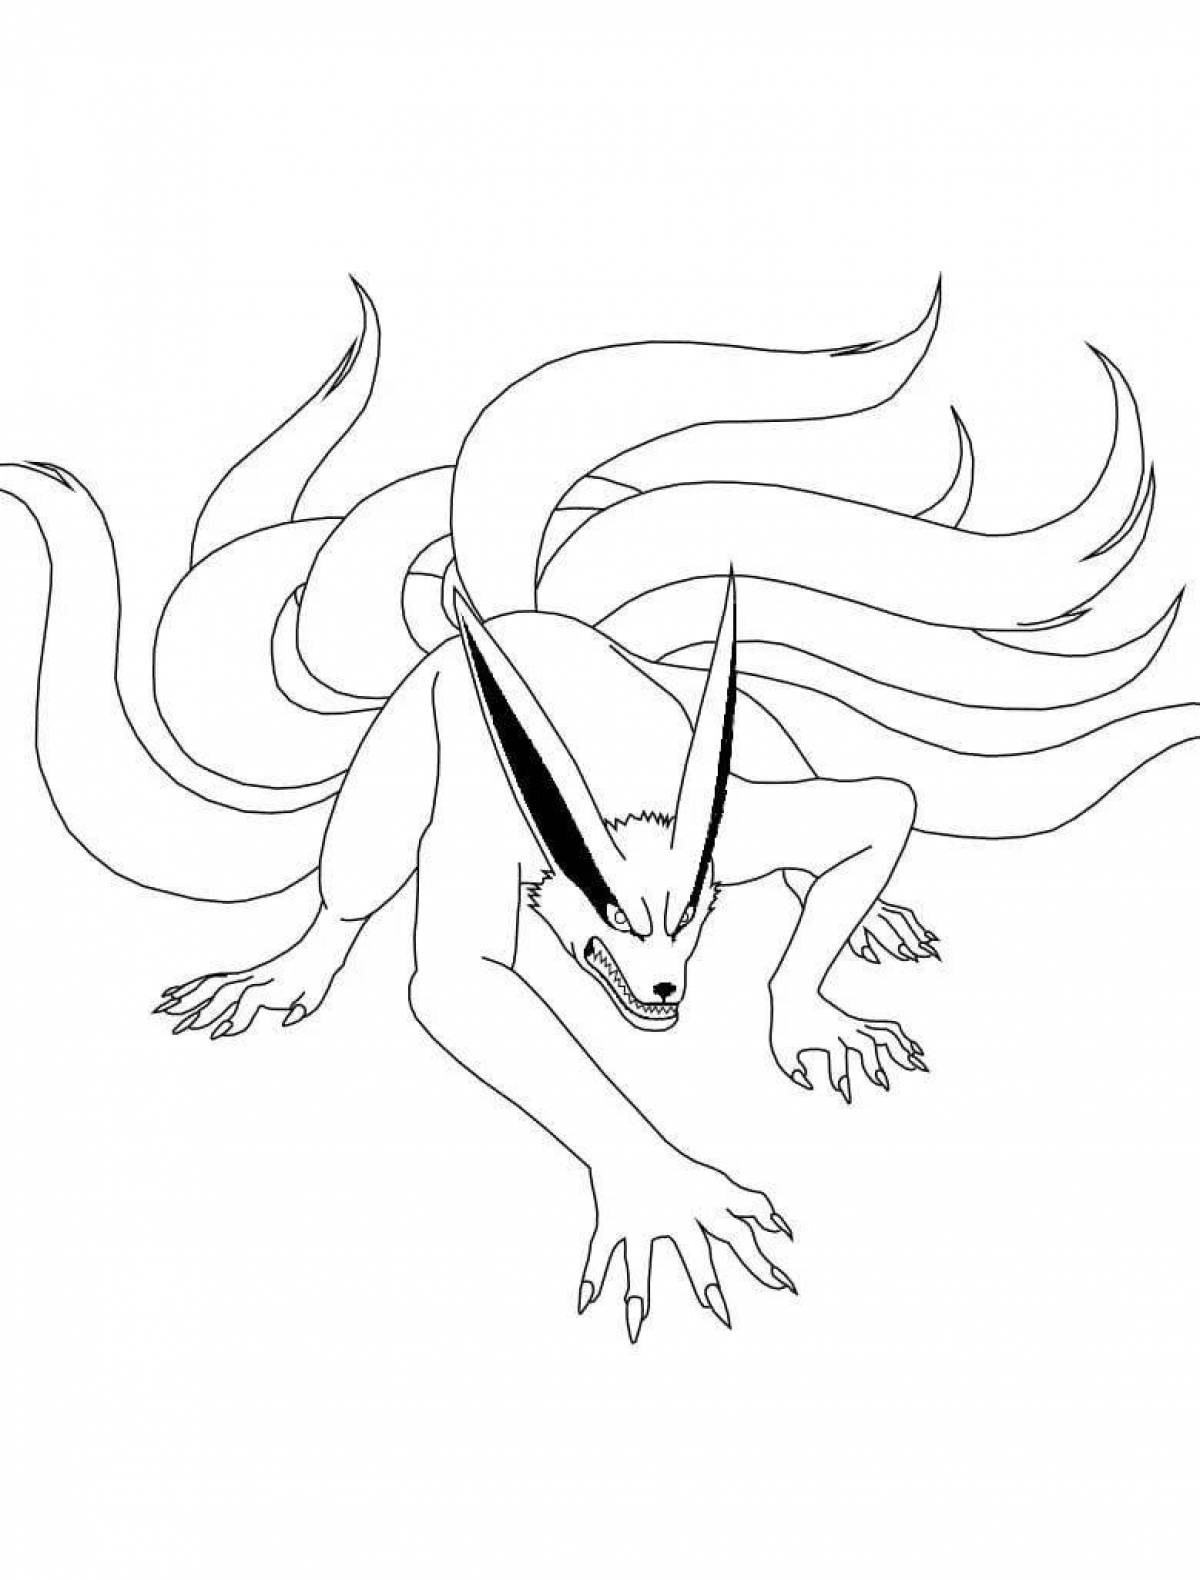 Nine-tailed fox coloring page